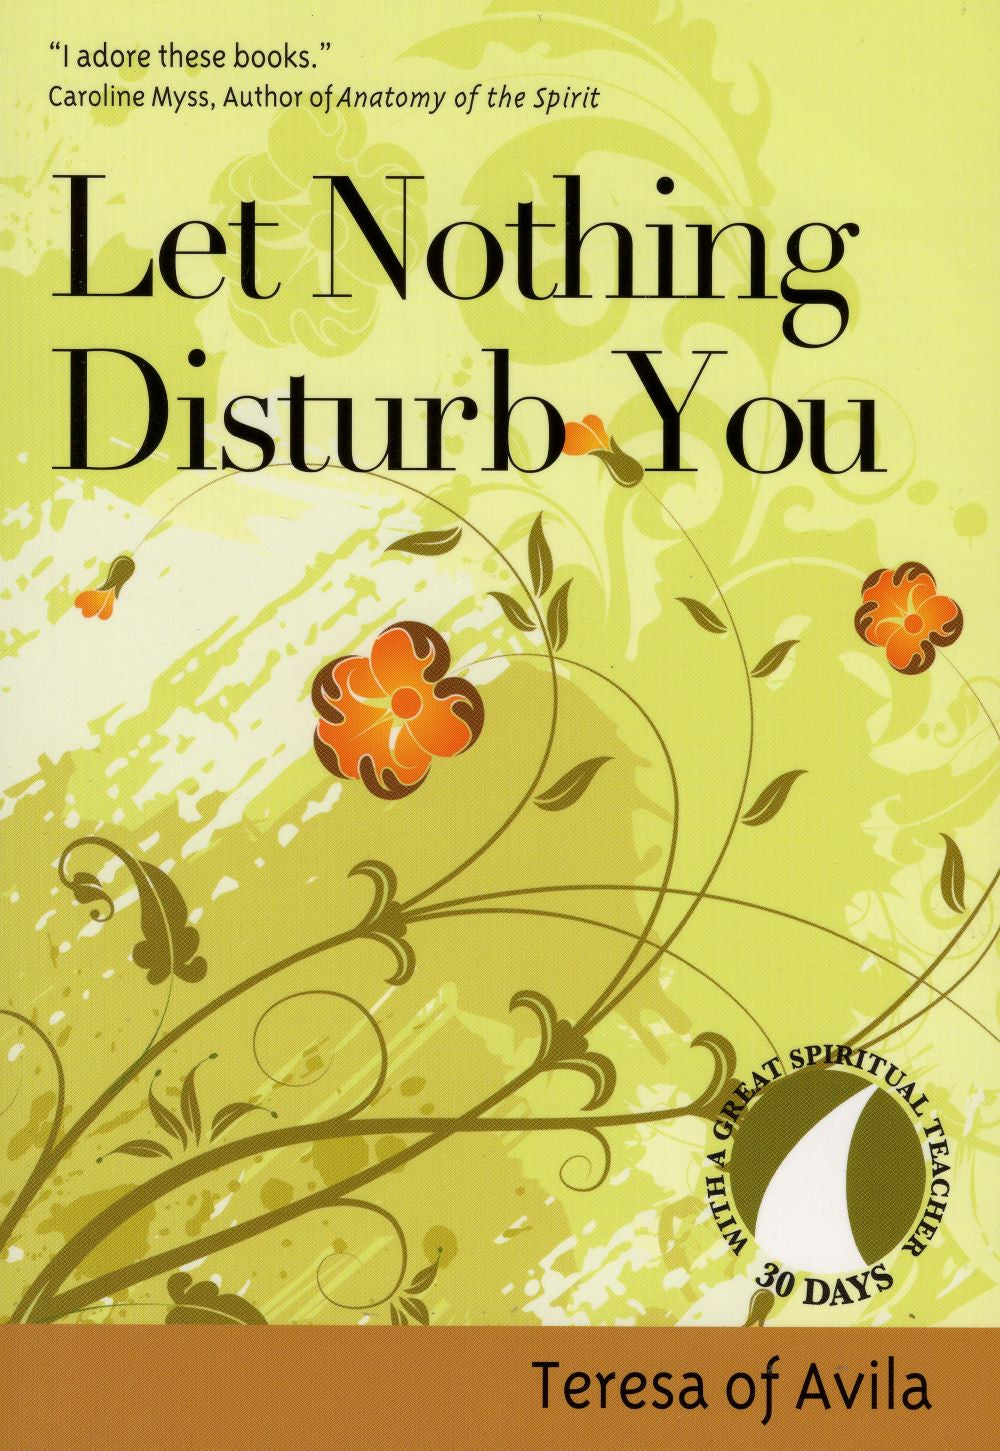 LET NOTHING DISTURB YOU (2008)